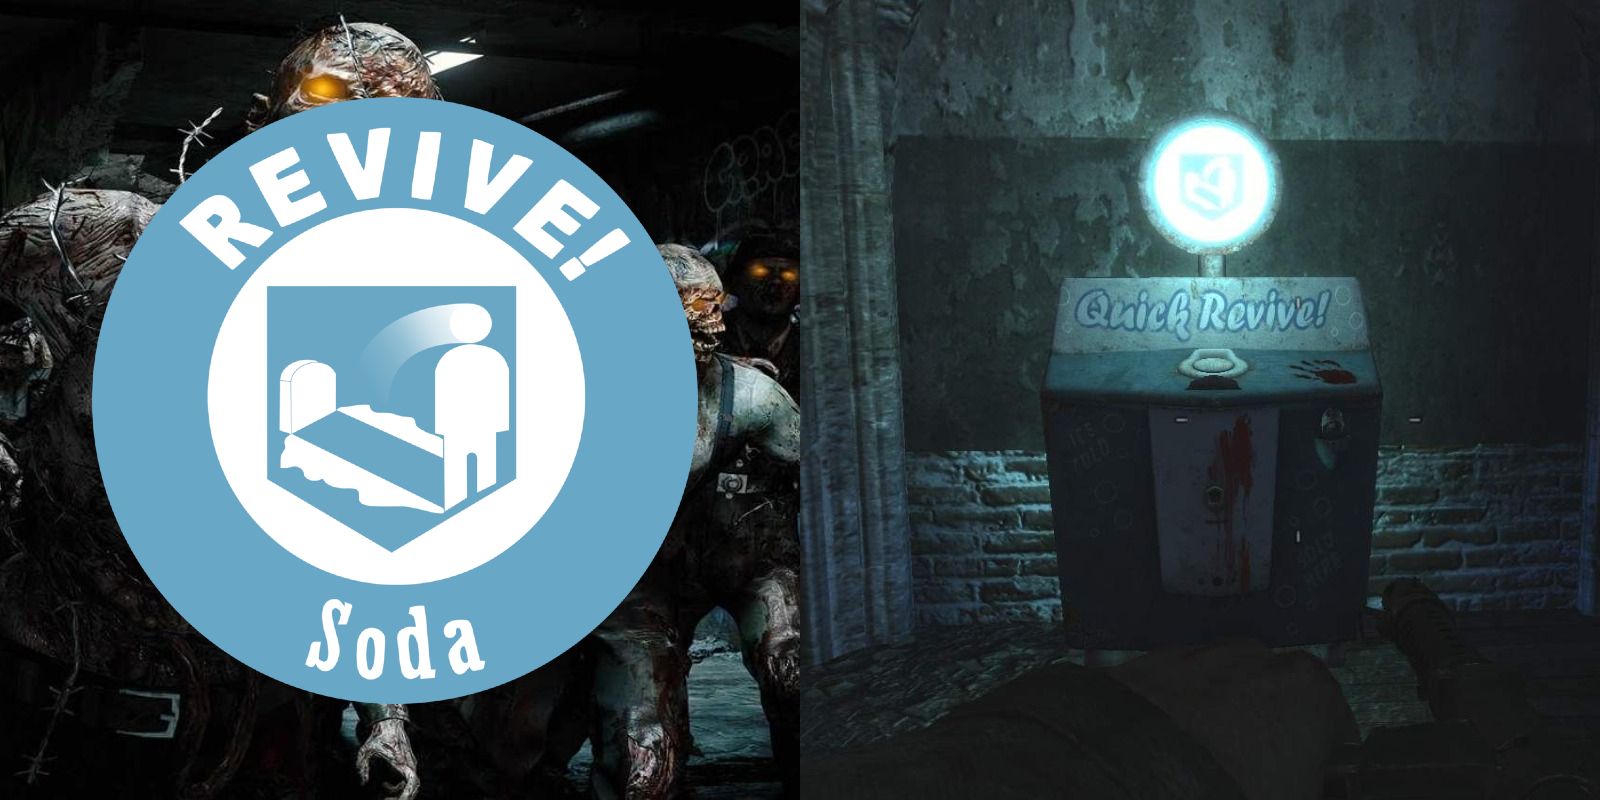 Quick Revive soda machine and logo in Call Of Duty franchise